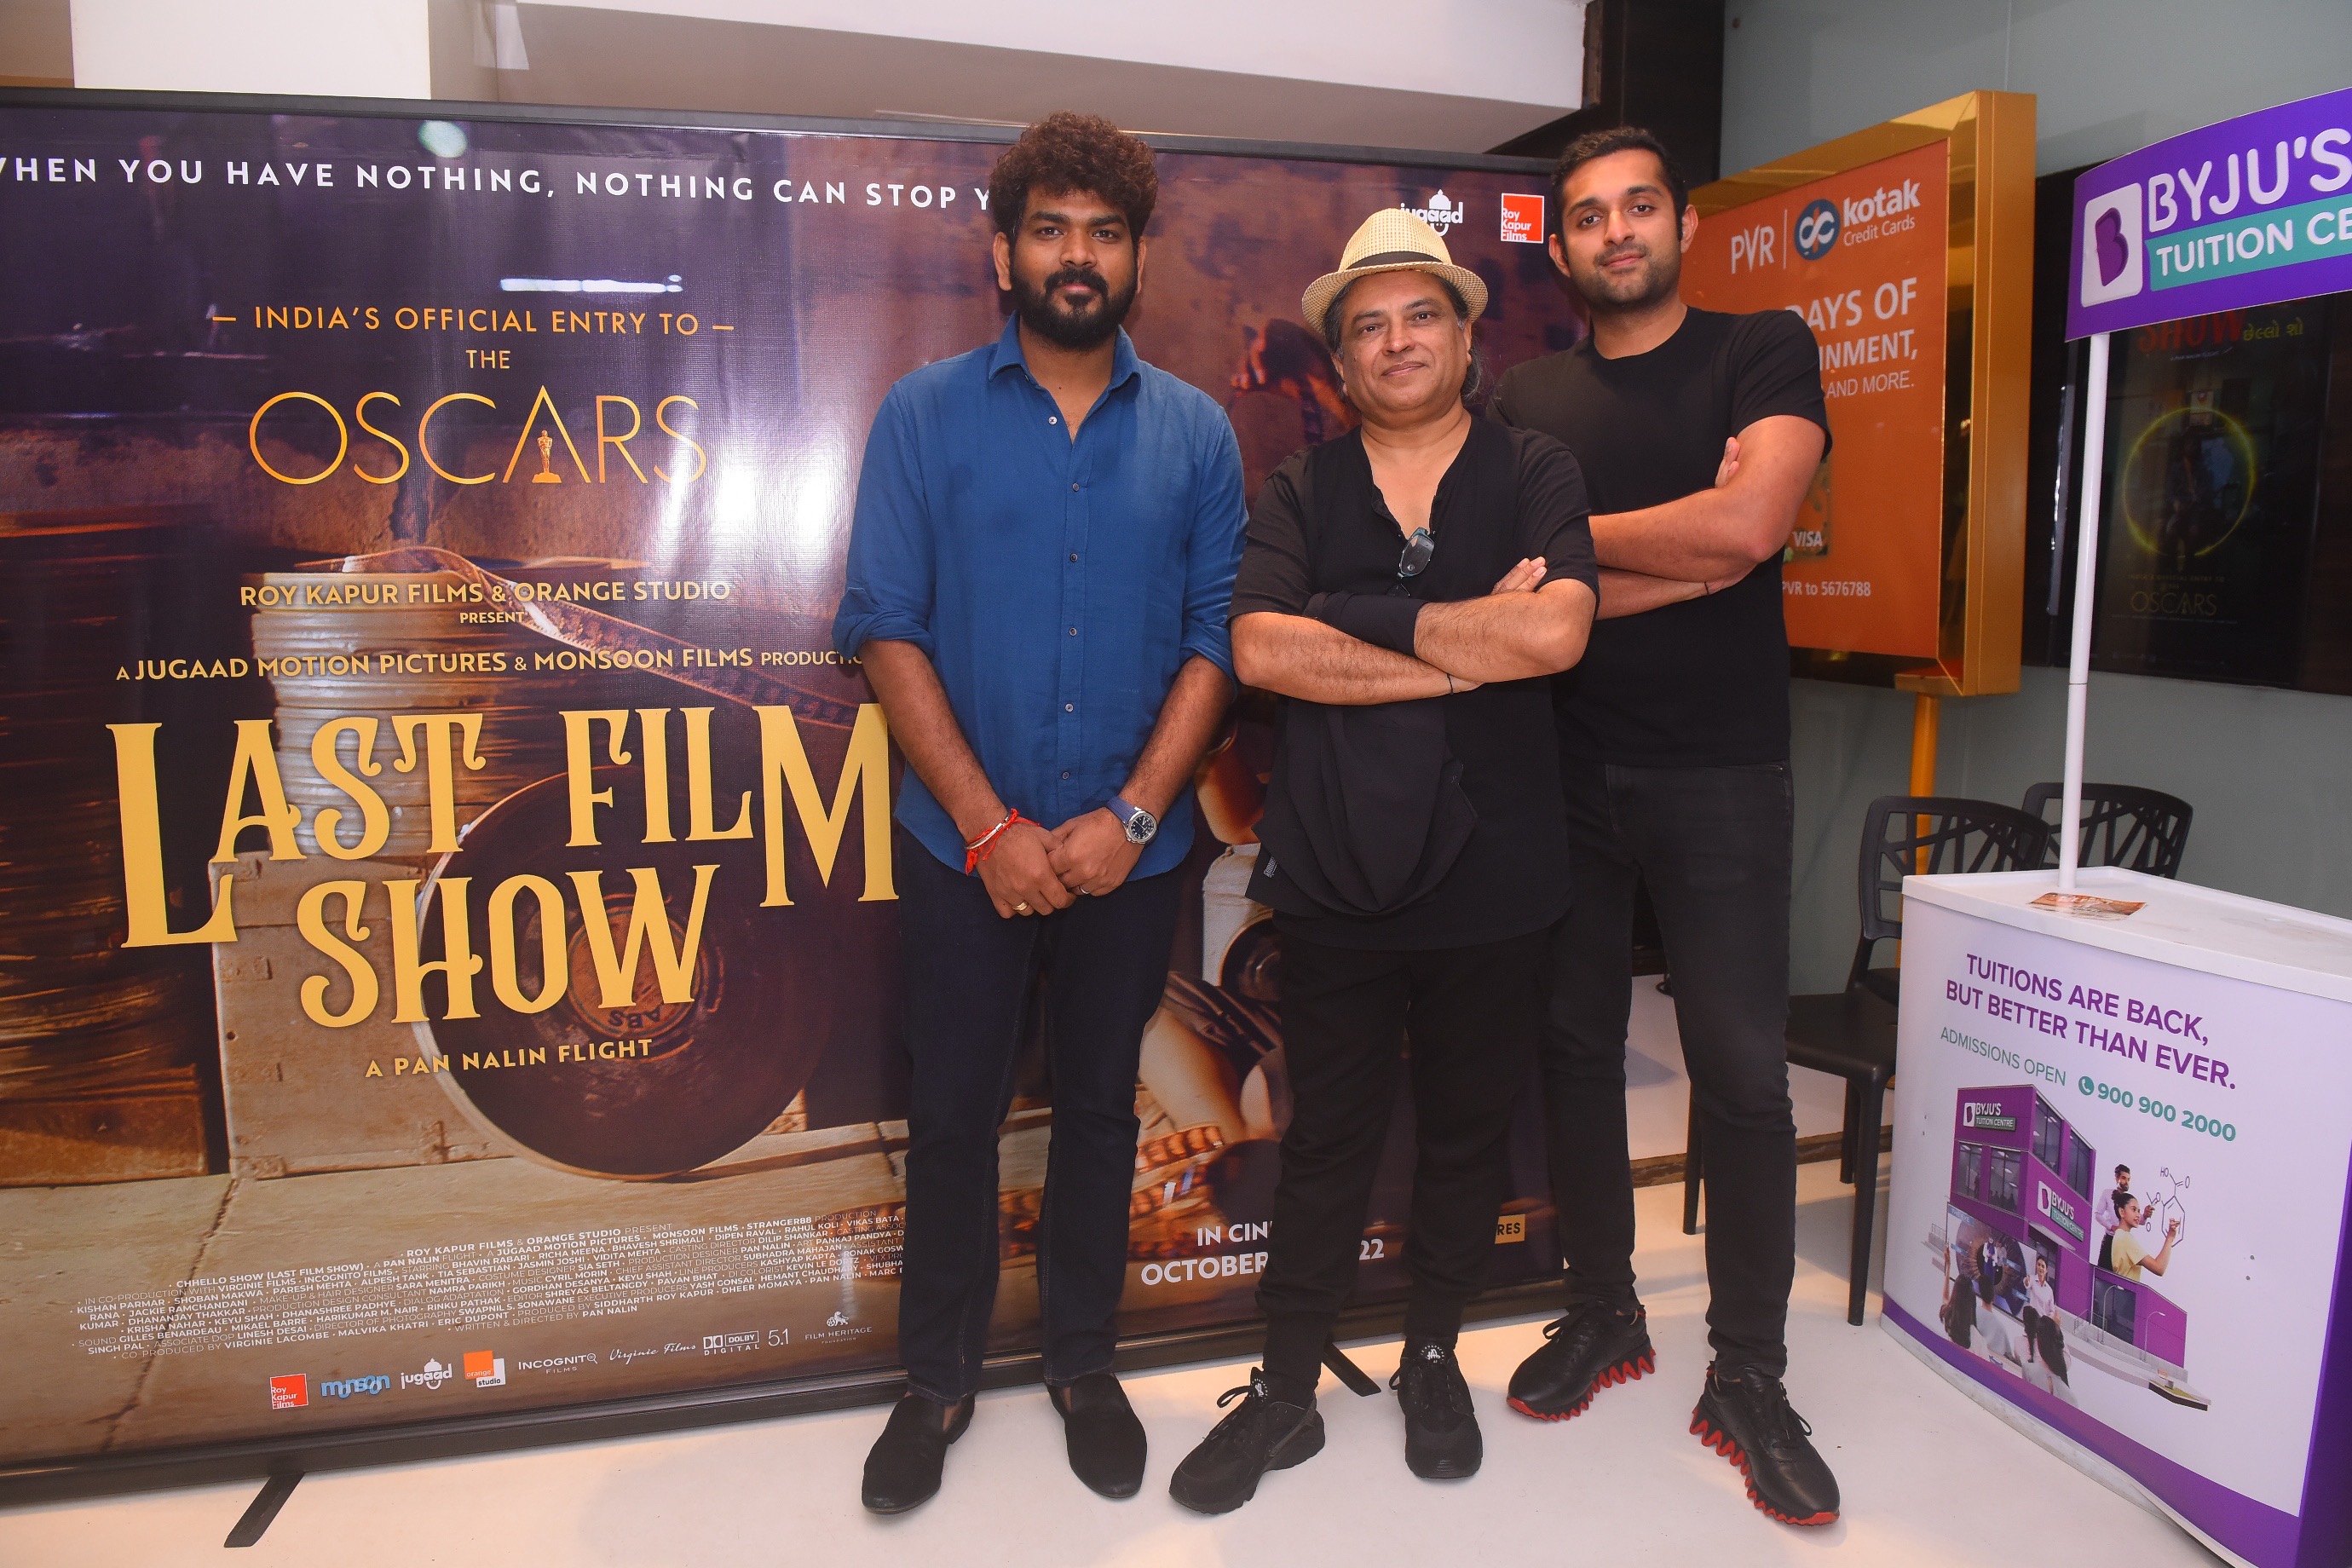 Indian Film Director Vignesh Shivan attends ‘LAST FILM SHOW (CHHELLO SHOW)’ – INDIA’S OFFICIAL ENTRY TO THE OSCARS at Sathyam Cinemas